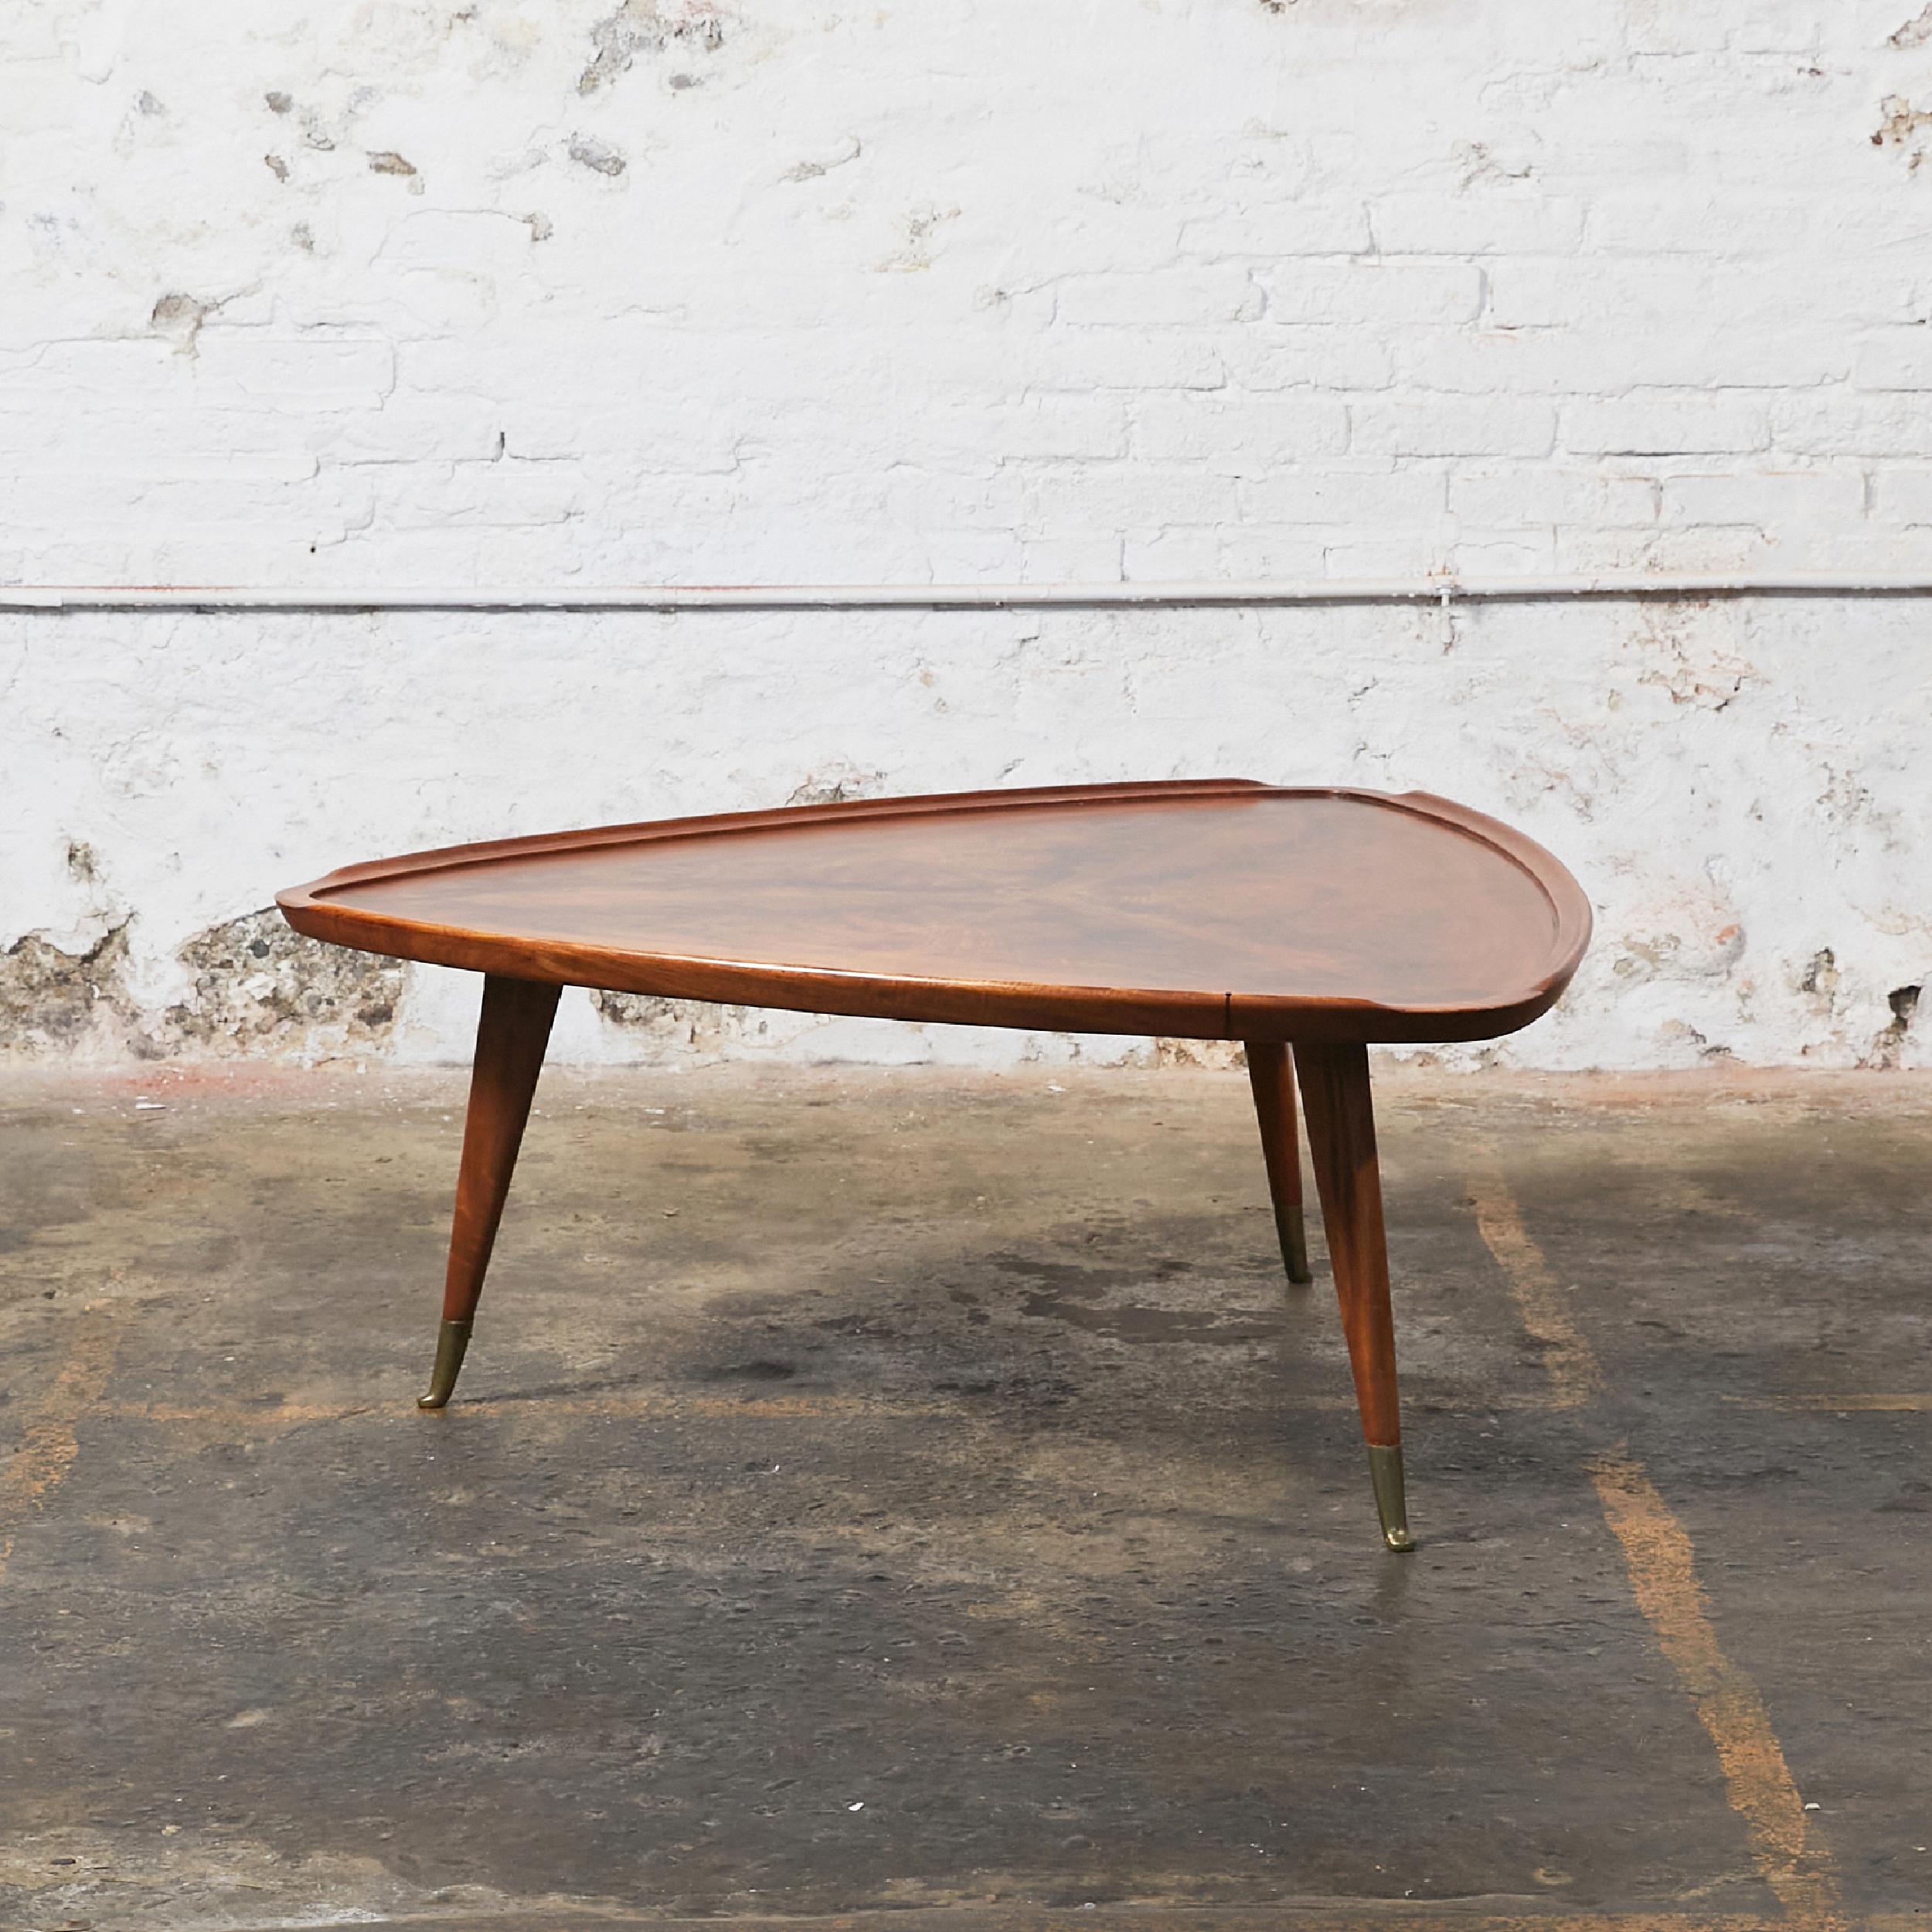 Triangular rosewood coffee table in the style of Giuseppe Scapinelli. Interrupted dovetail edge on three sides. Angled tapered legs with bronze feet. Made in Brazil, circa 1960.